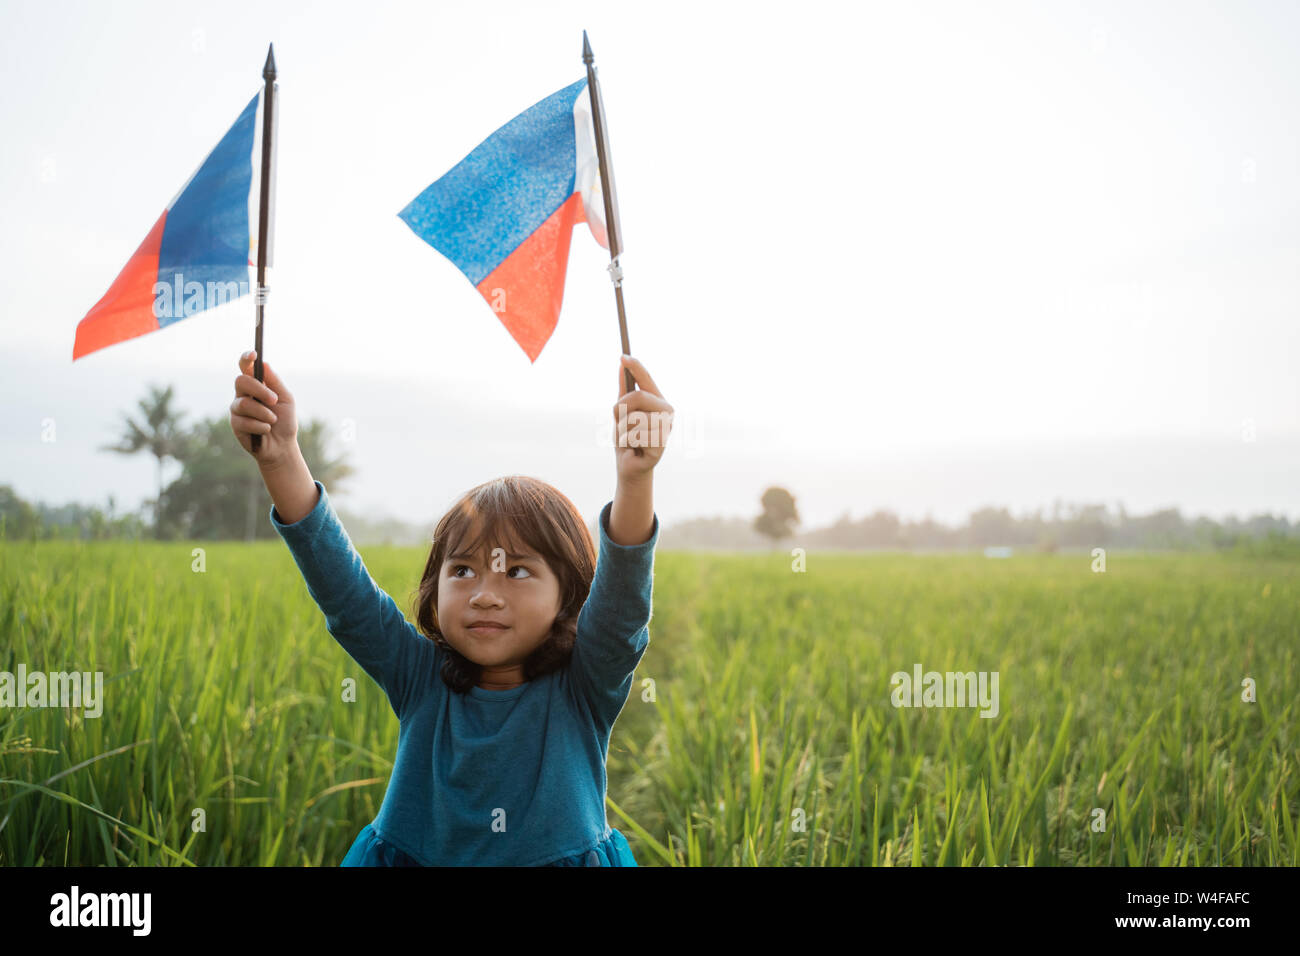 phillipine kid with national flag Stock Photo